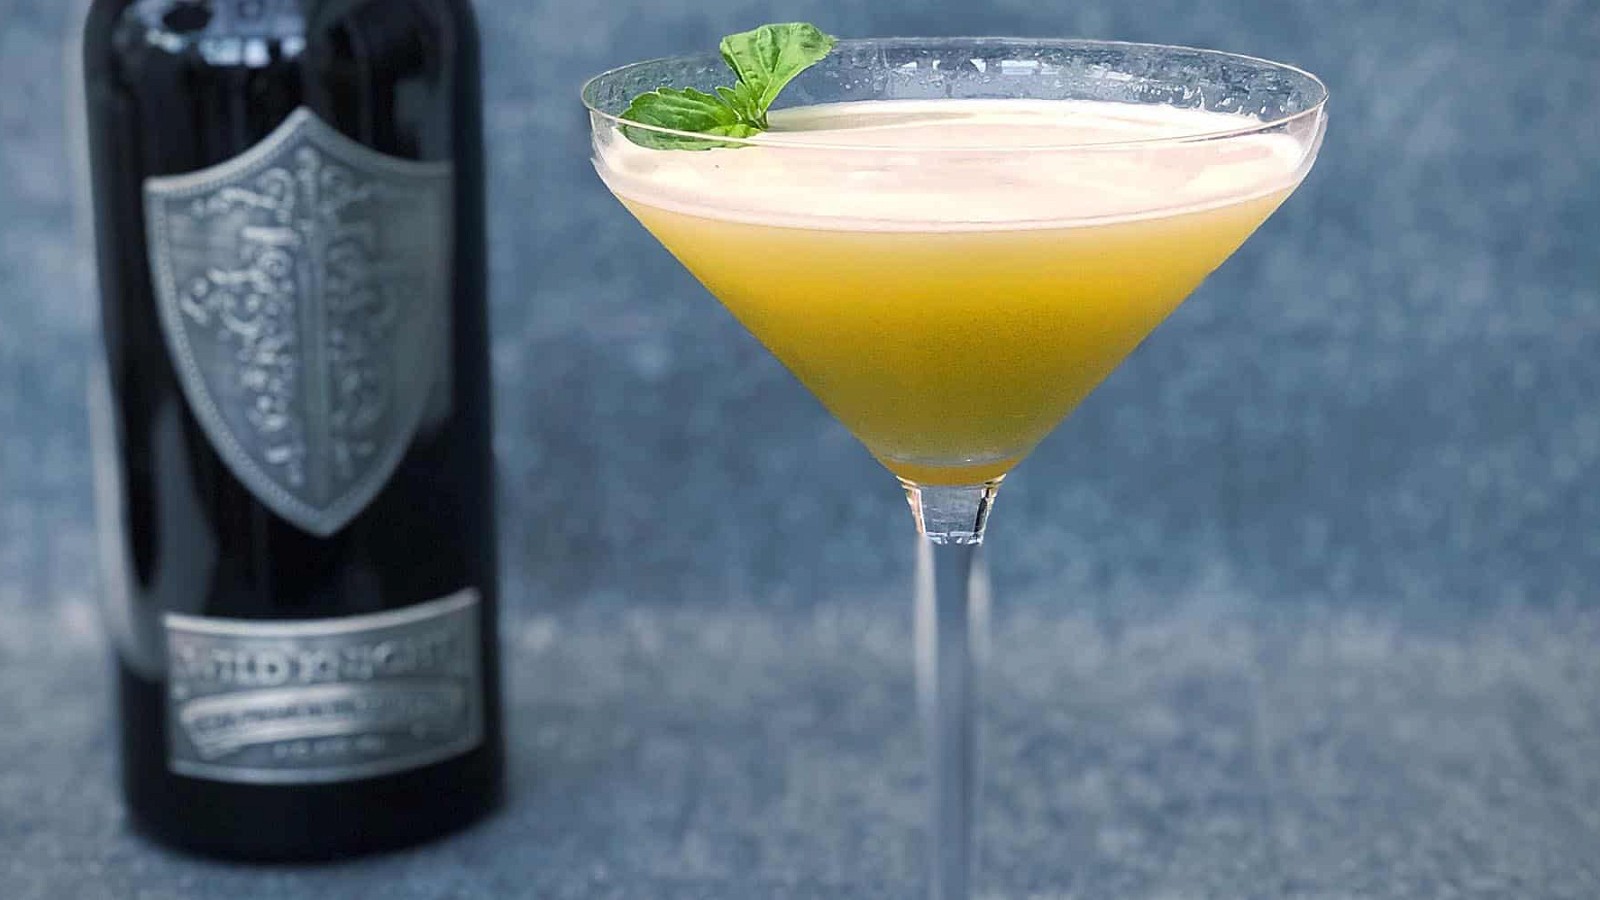 Image of Wild Knight® Basil and Pineapple Martini